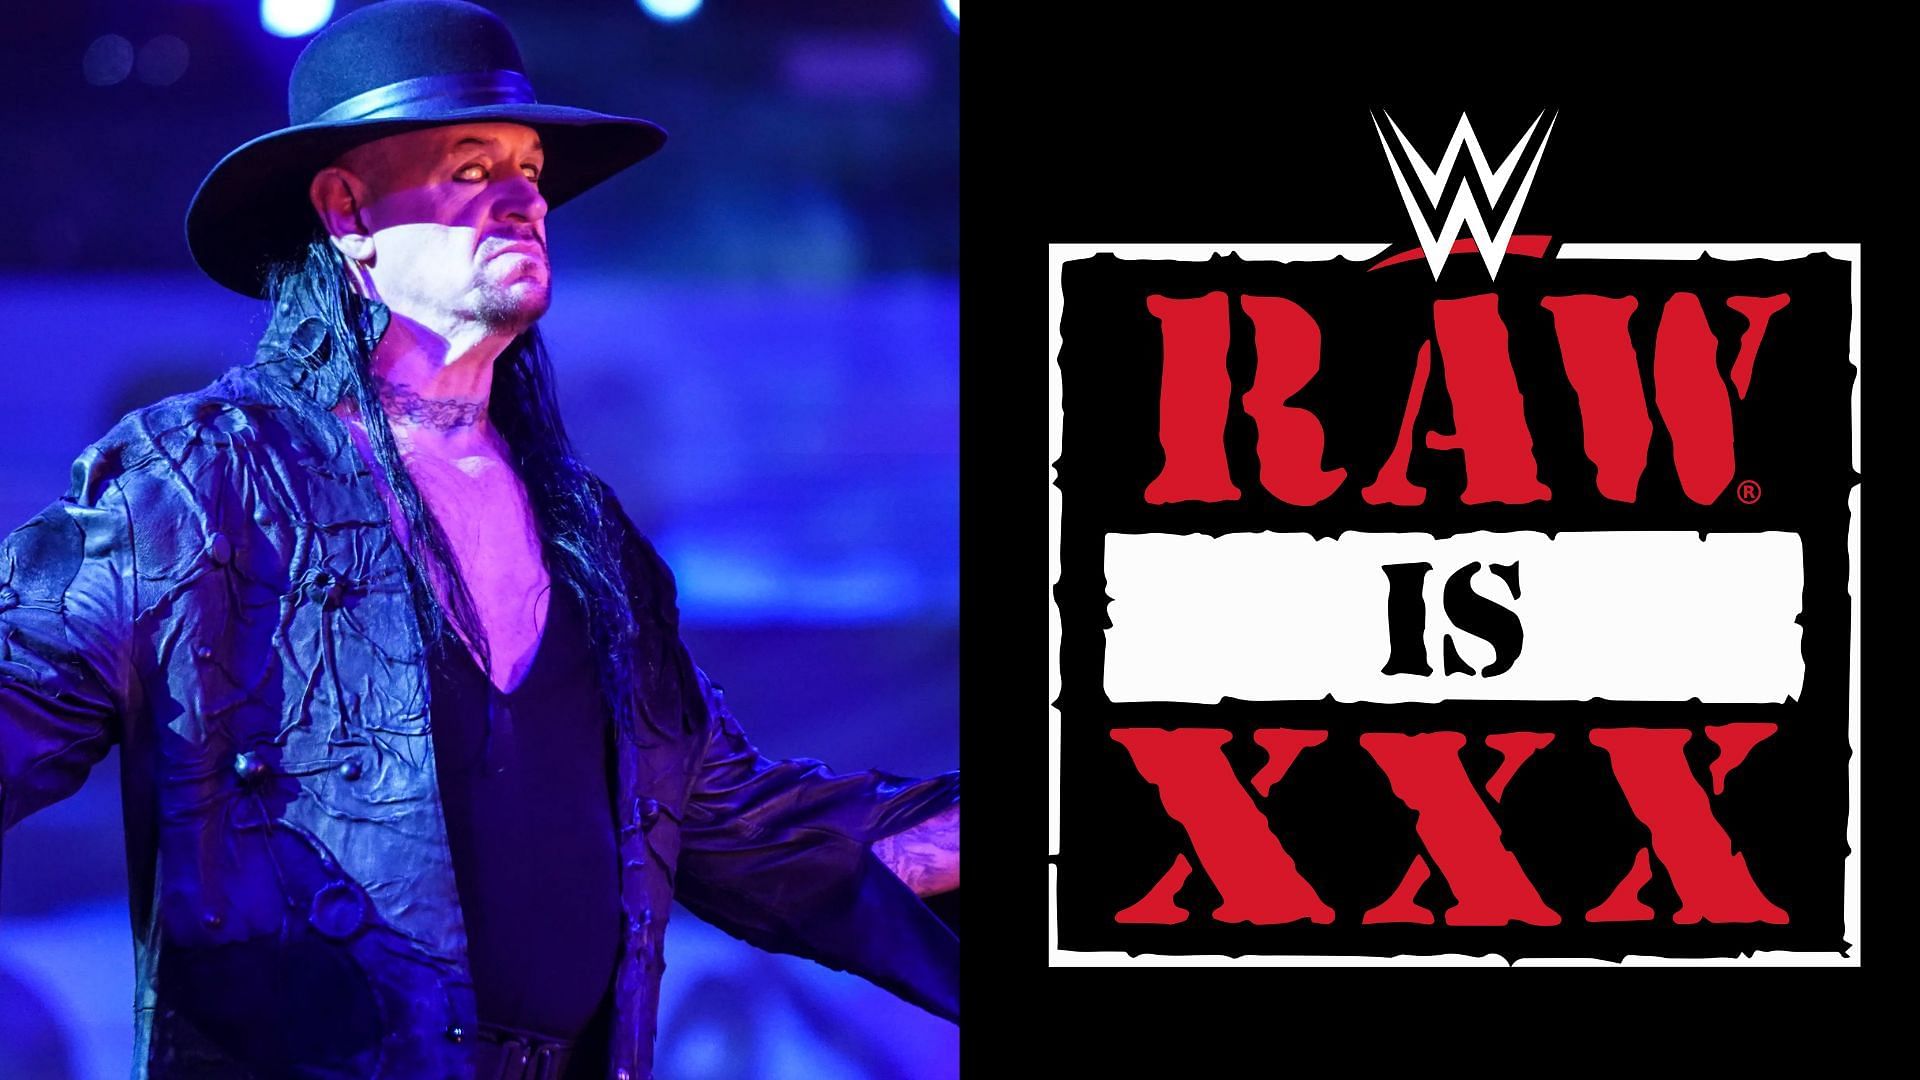 The Undertaker has been confirmed to be making an appearance at RAW XXX.